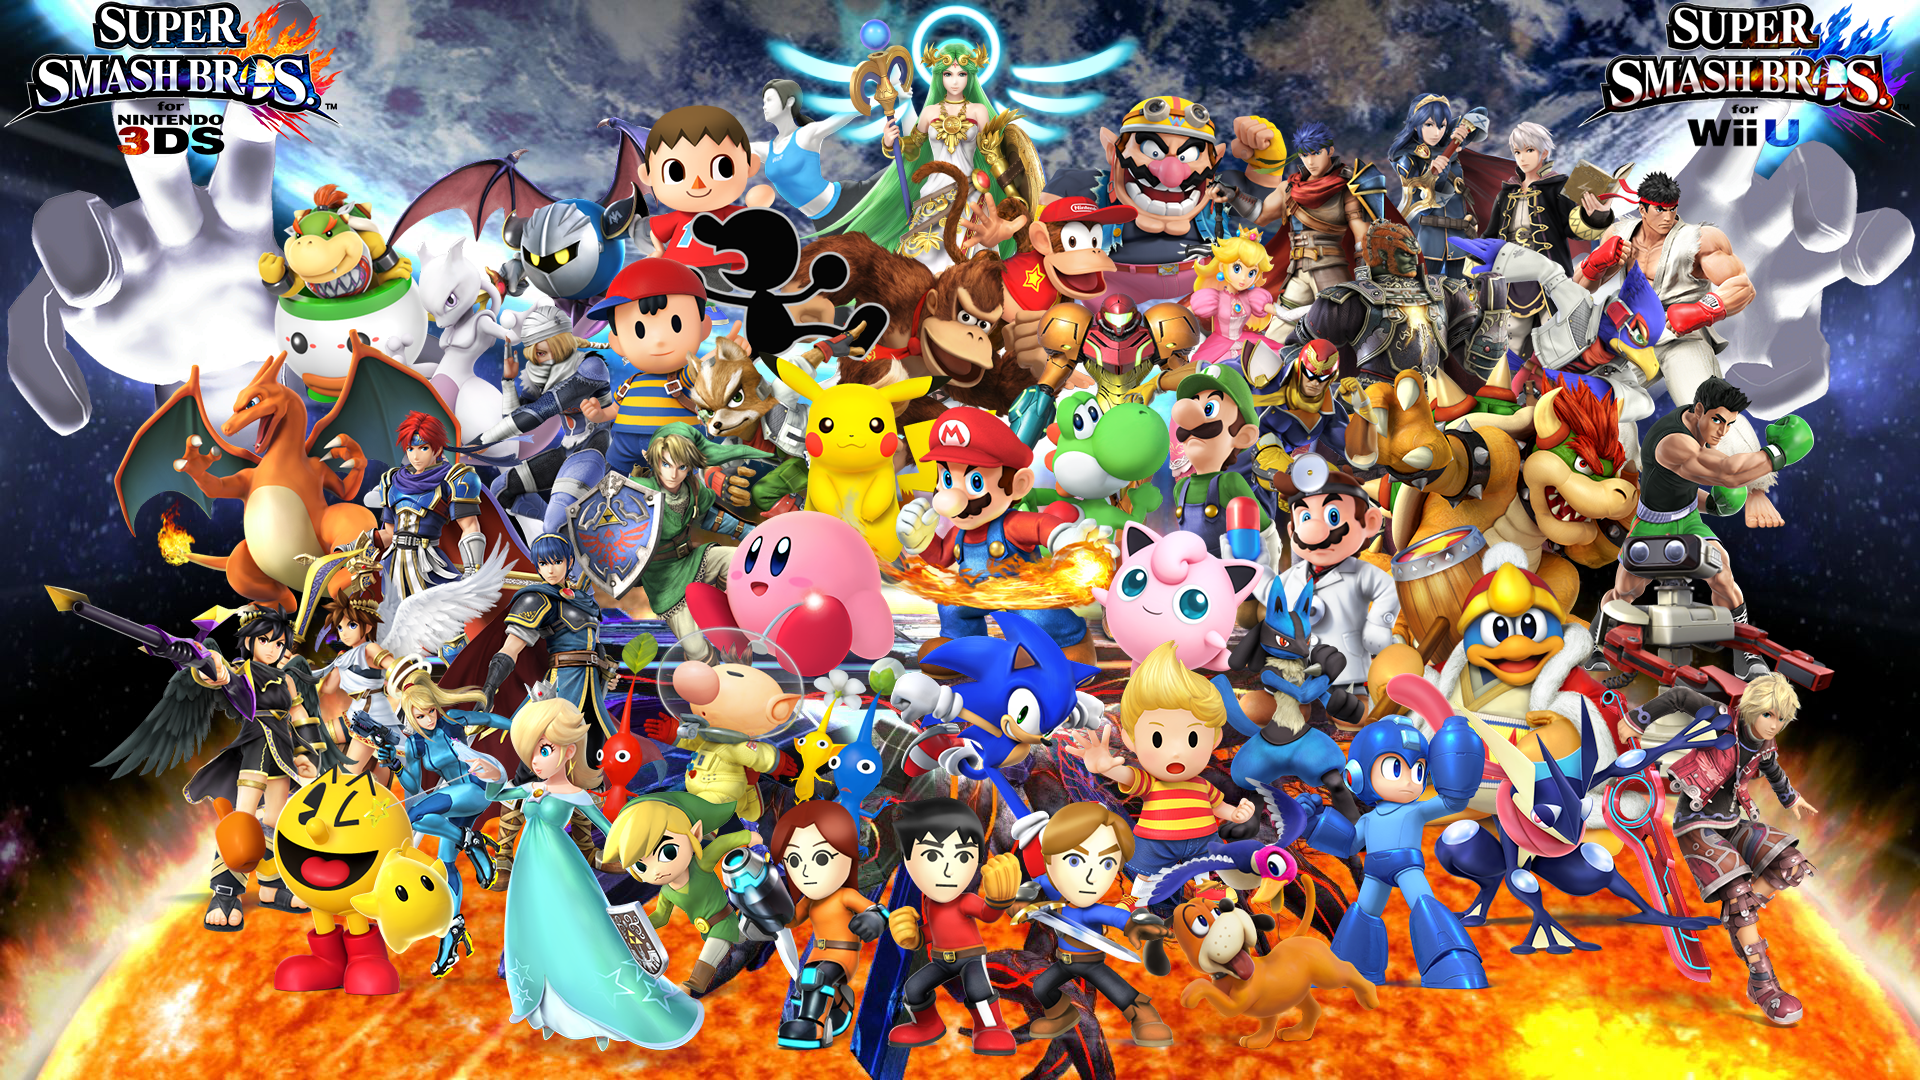 Super Smash Bros For 3ds Wii U Wallpaper By Thef5deviants